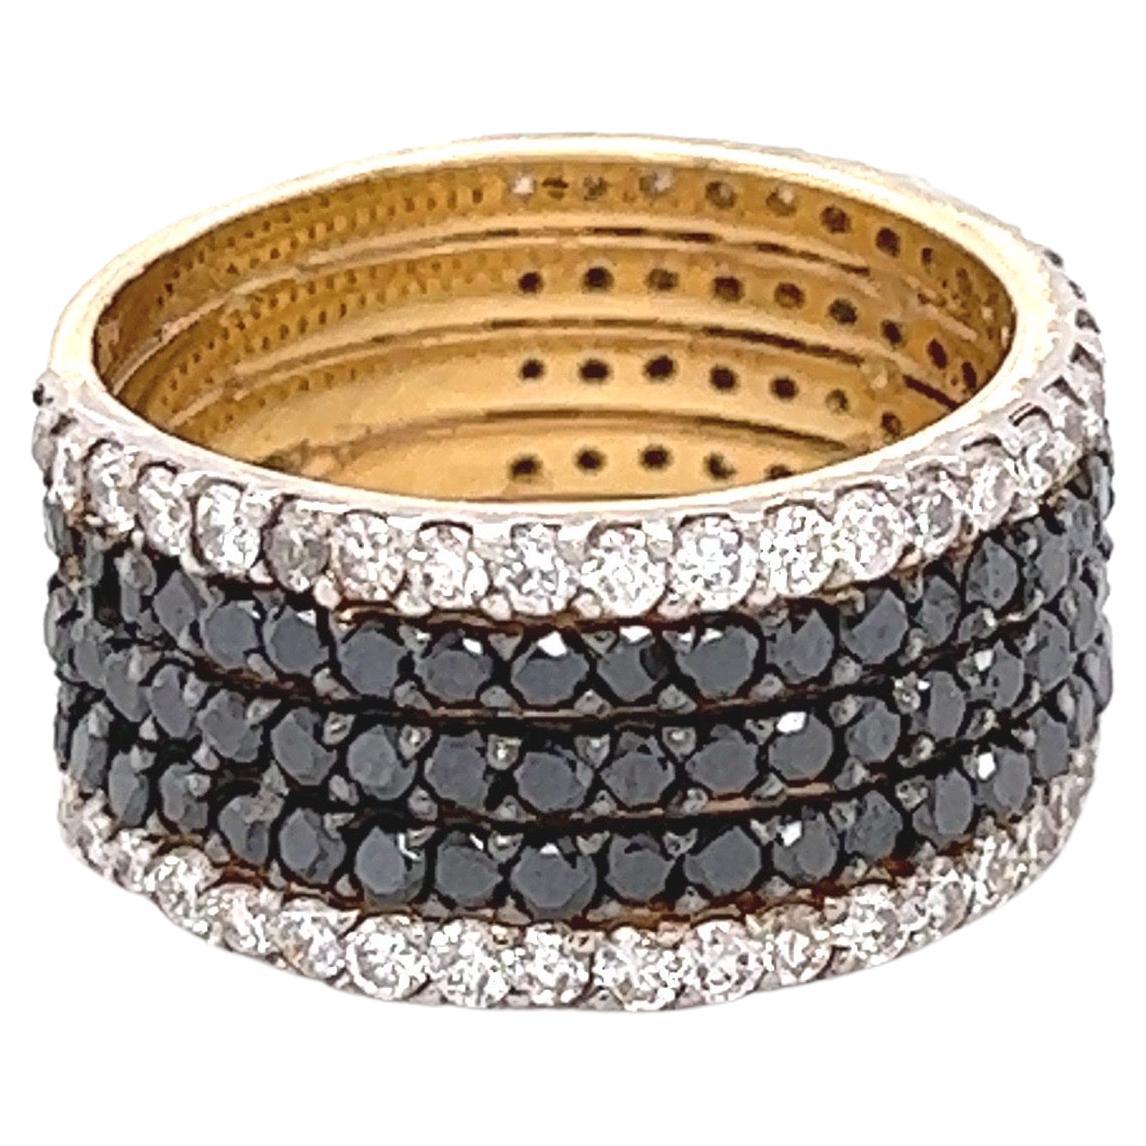 This Black and White Diamond Band is stunning and versatile! Can be worn as a wedding or engagment band or as a gorgeous cocktail ring or an everyday stunner! 

There are 90 Black Round Cut Diamonds that weigh 1.80 Carats and 60 Round Cut Diamonds